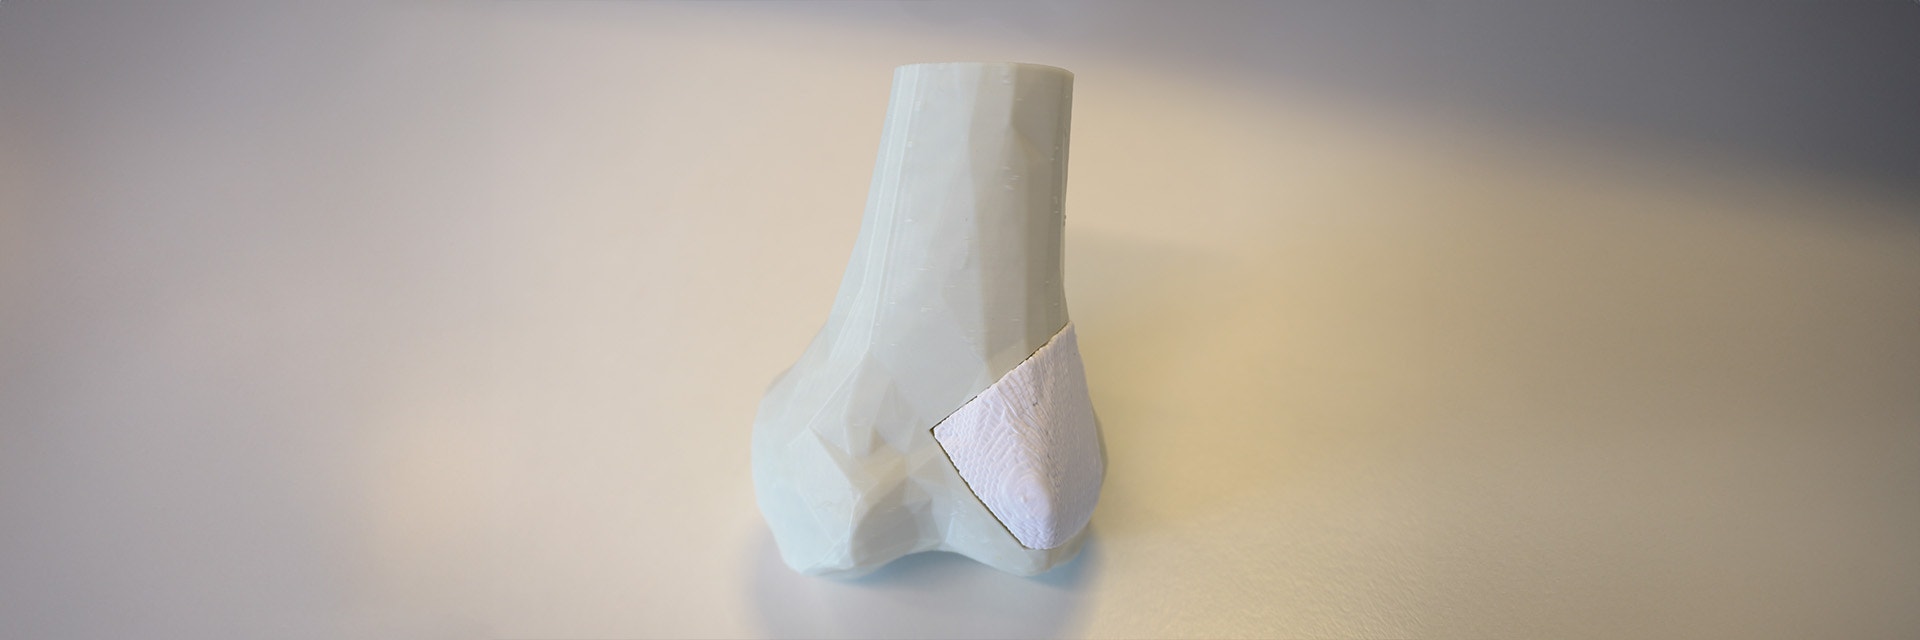 Final bone model with the 3D-printed bone implant perfect placed inside